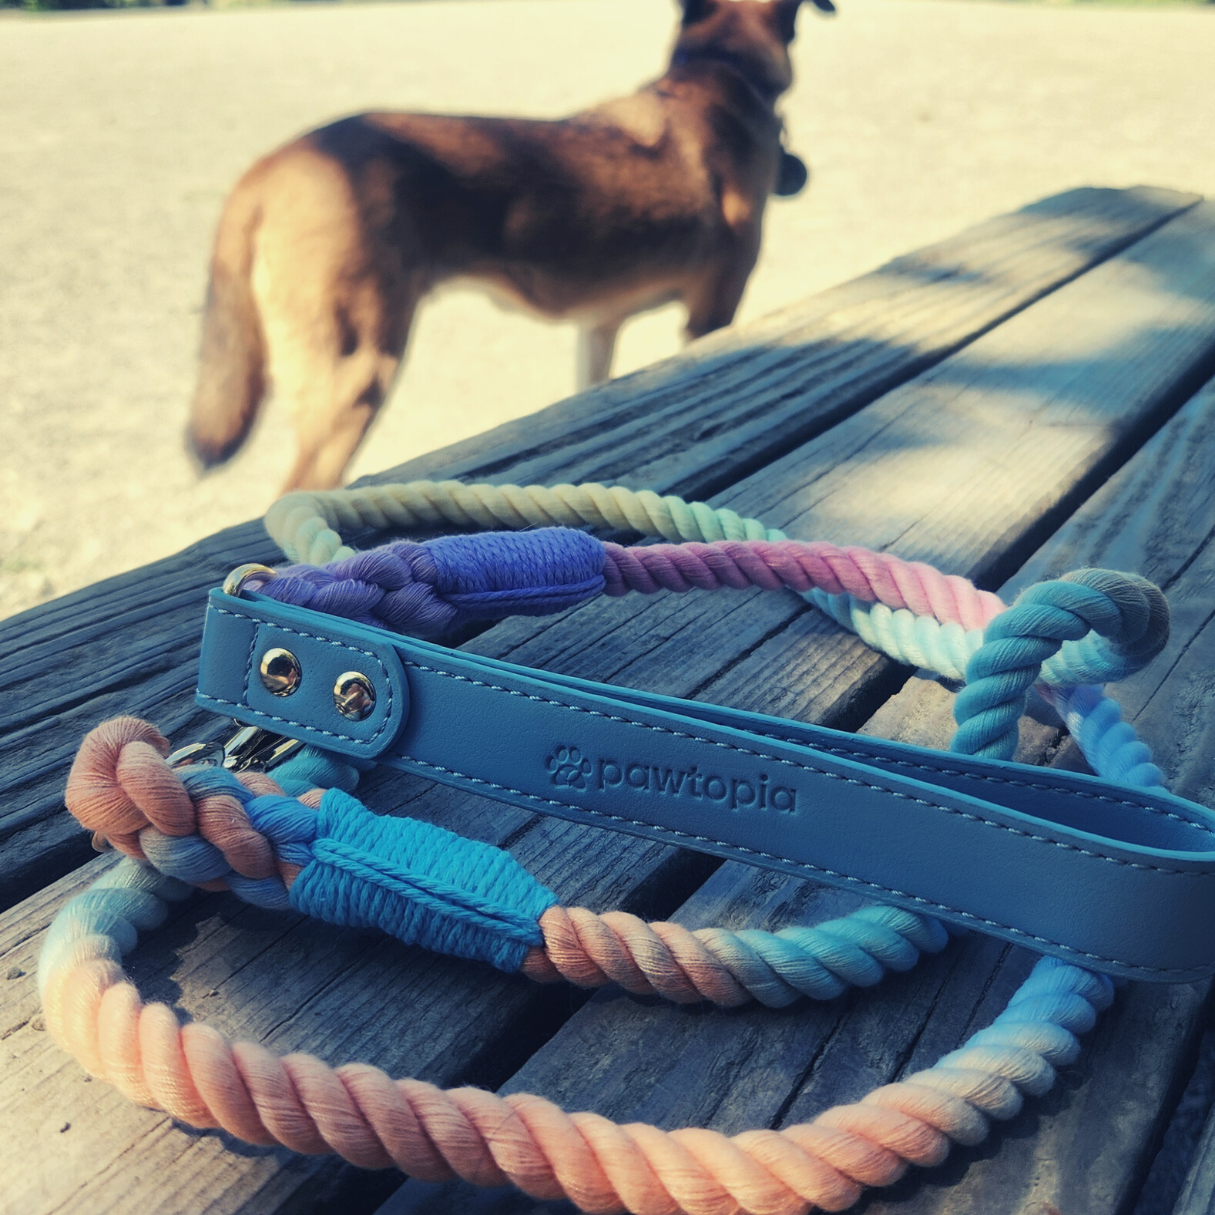 5 FT Dog Leash & Collar Set for Large Dogs, Cotton Braided Rope with Vegan Leather Handle (Light Blue, Large)